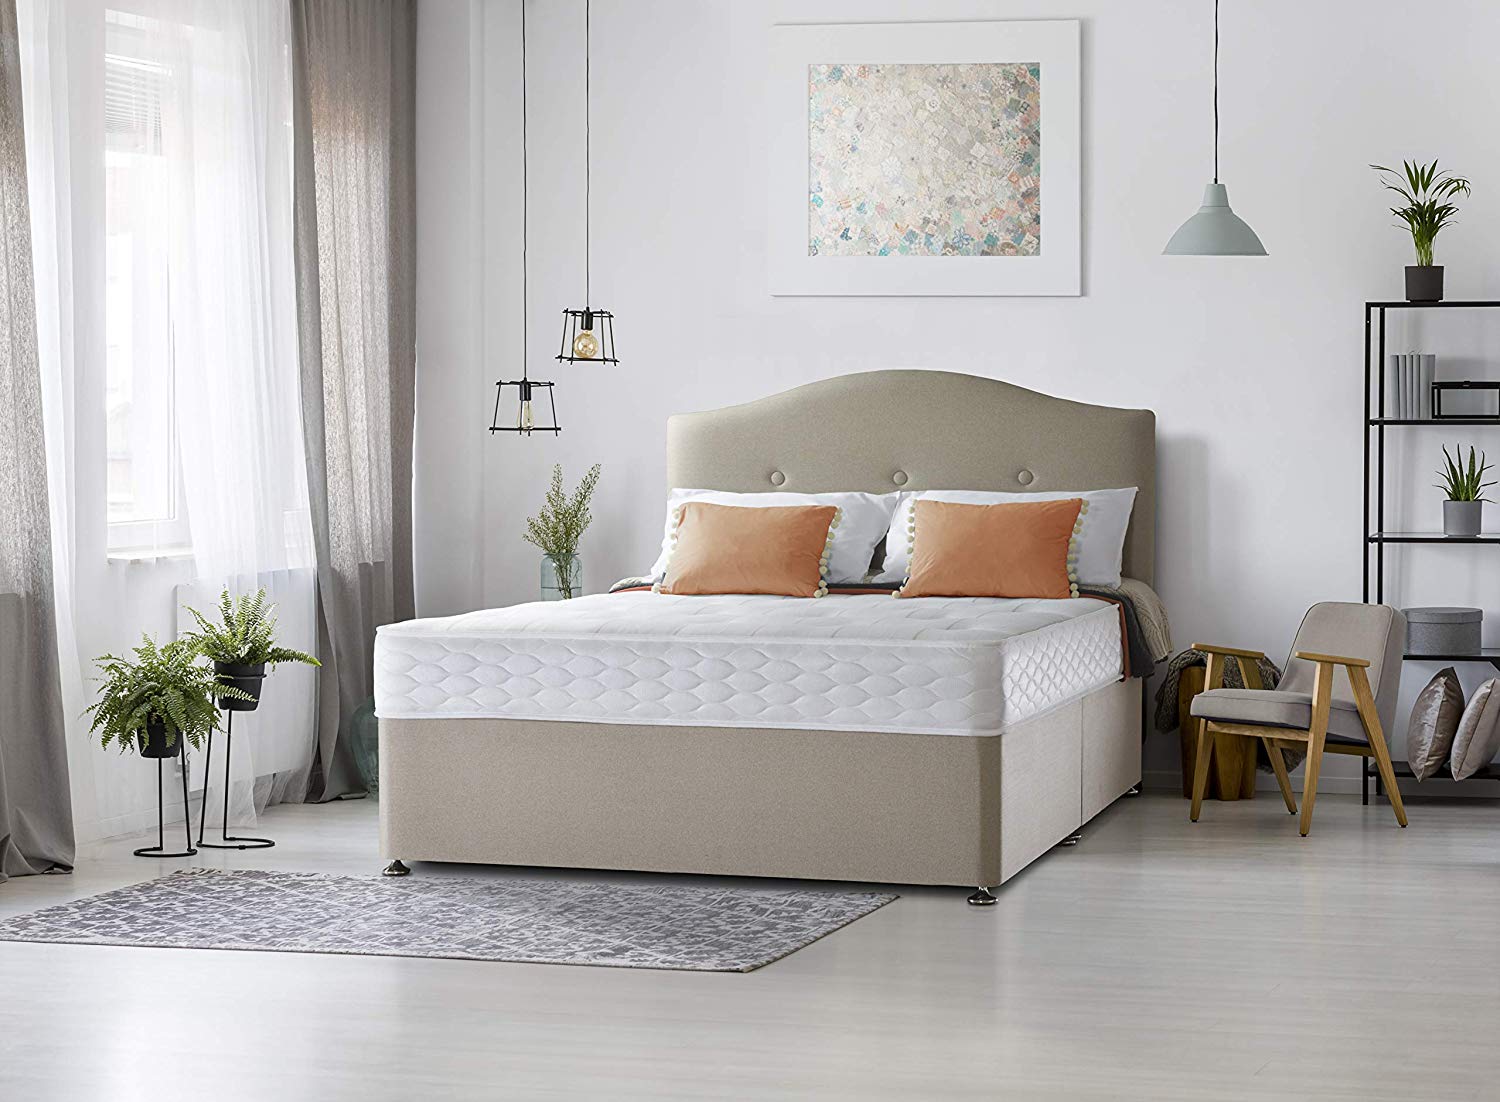 Sealy Posturpedic Ortho Backcare Firm Spring Tufted Tencel Purotex Mattress